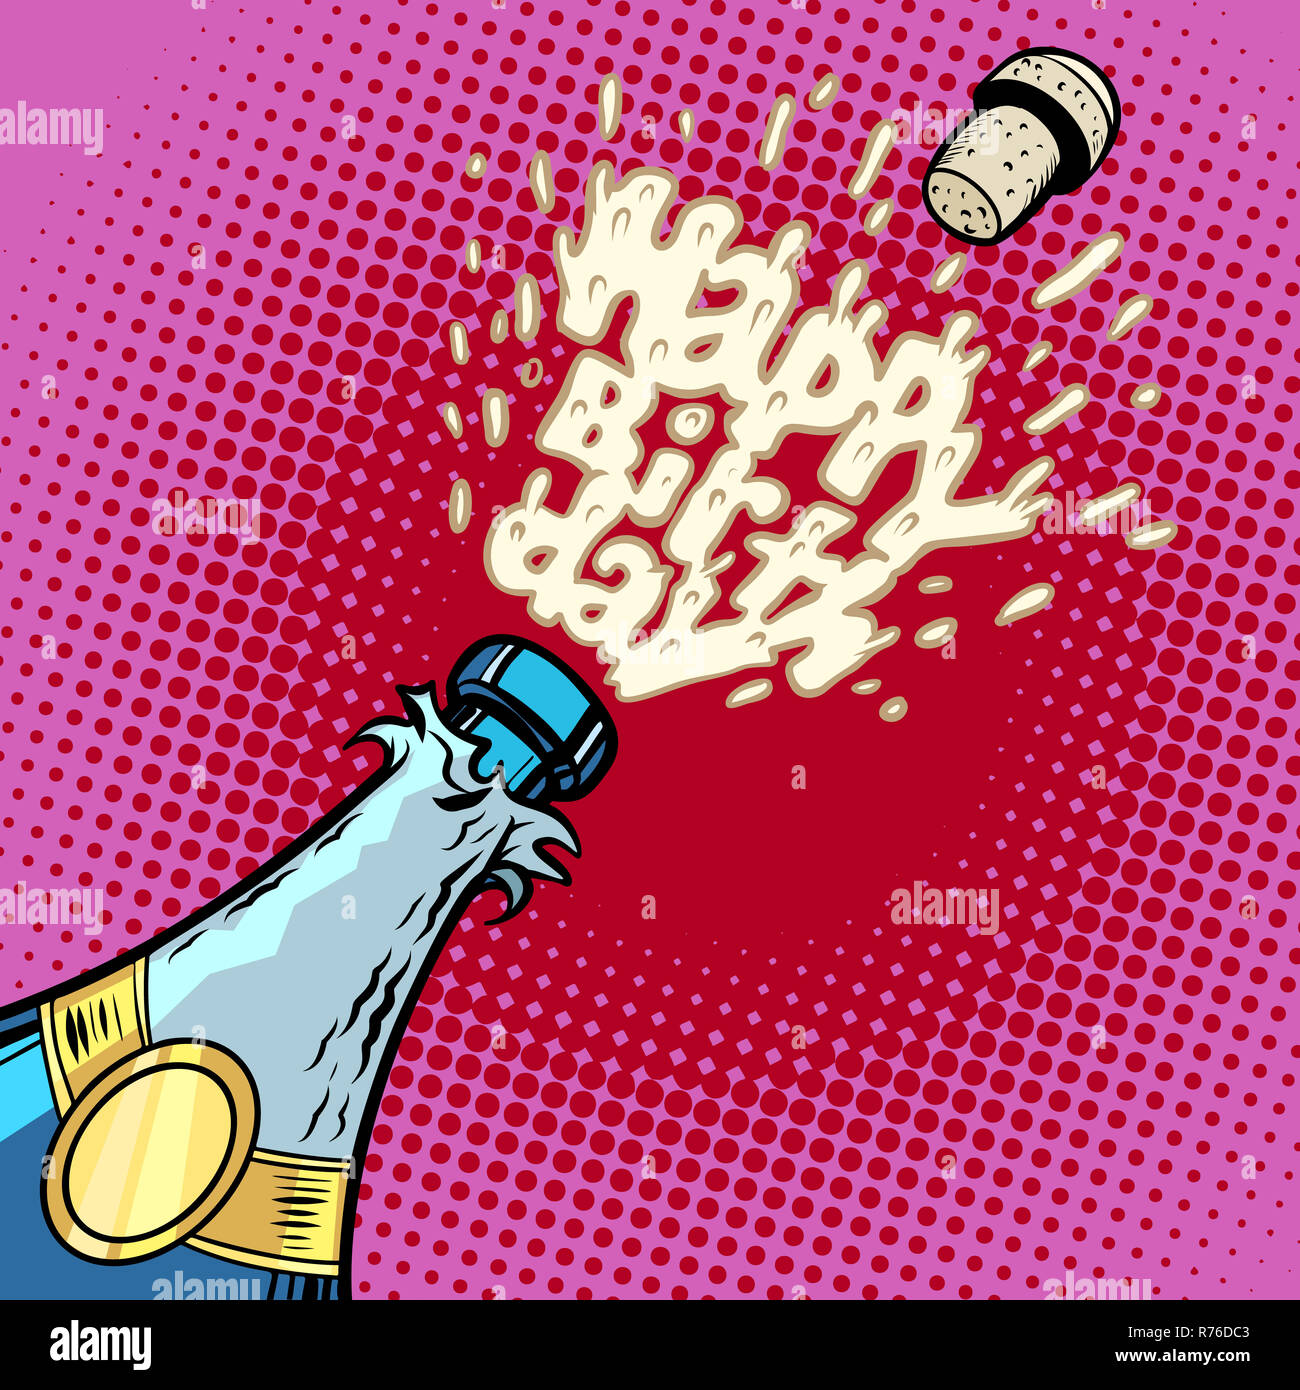 Opening Champagne Bottle Pop Art High Resolution Stock Photography And Images Alamy